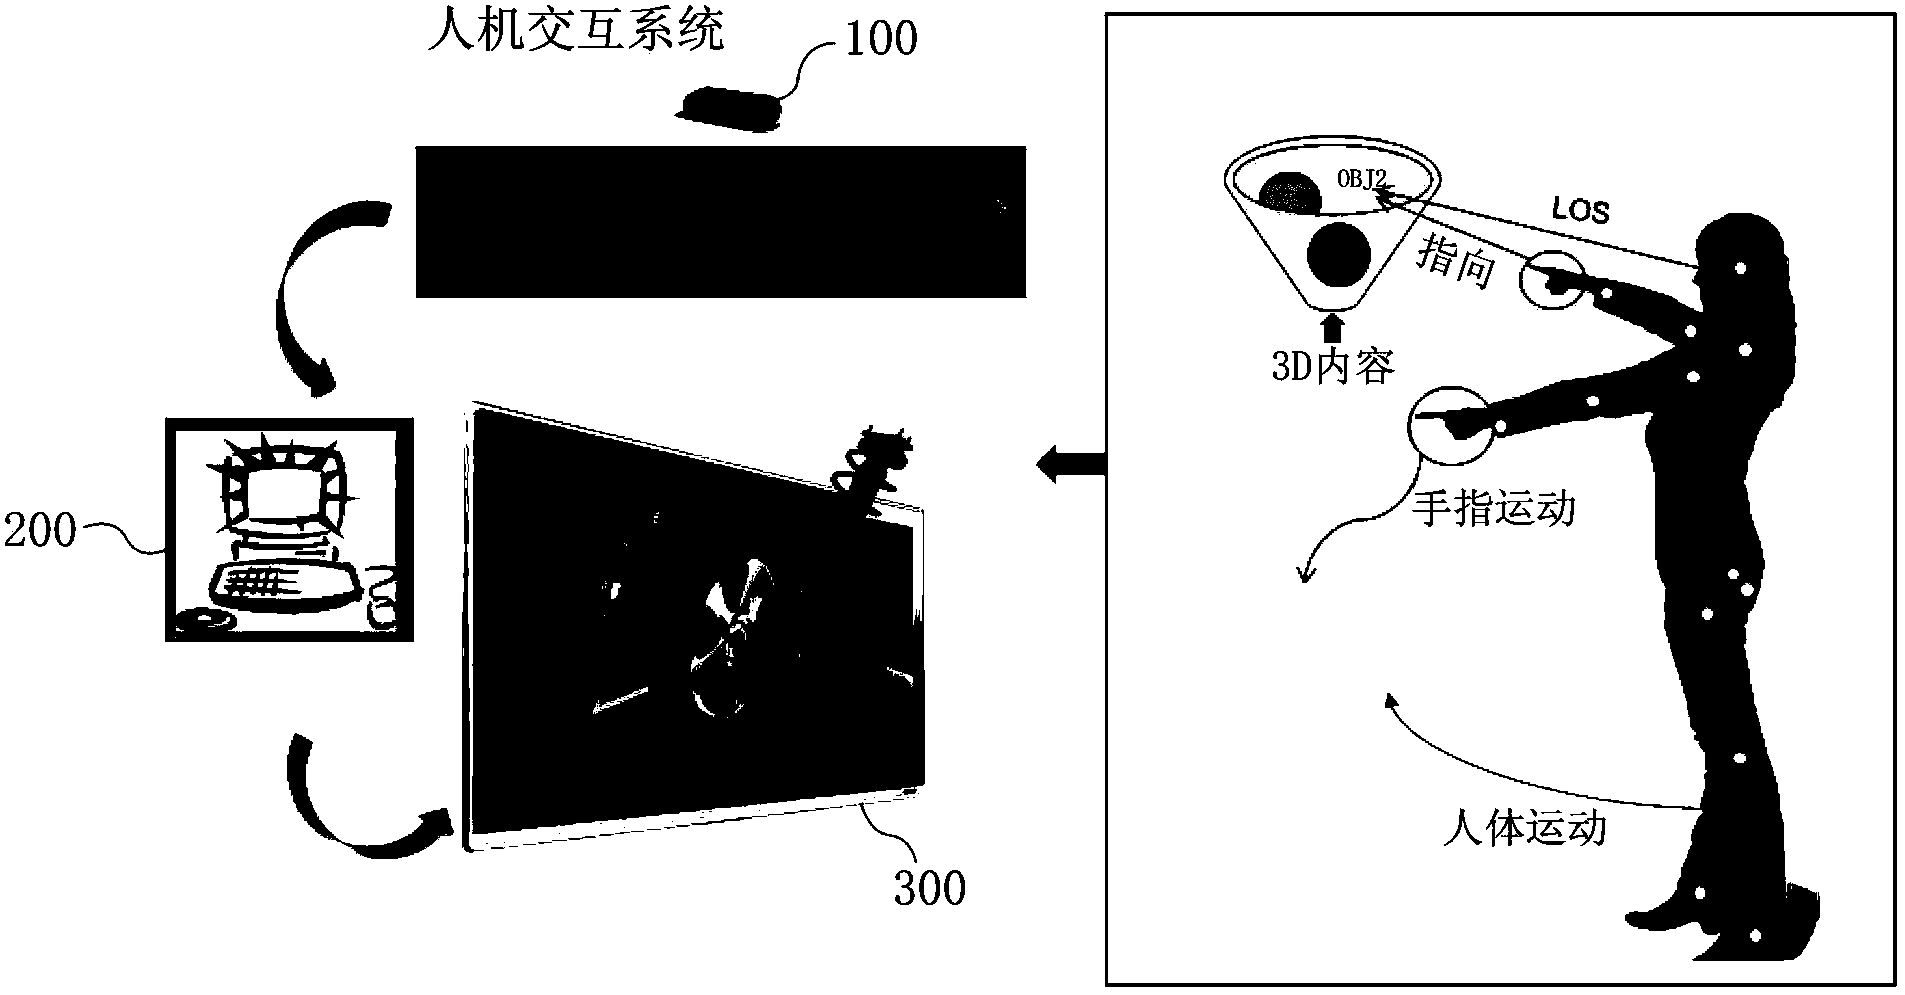 Man-machine interactive system and method